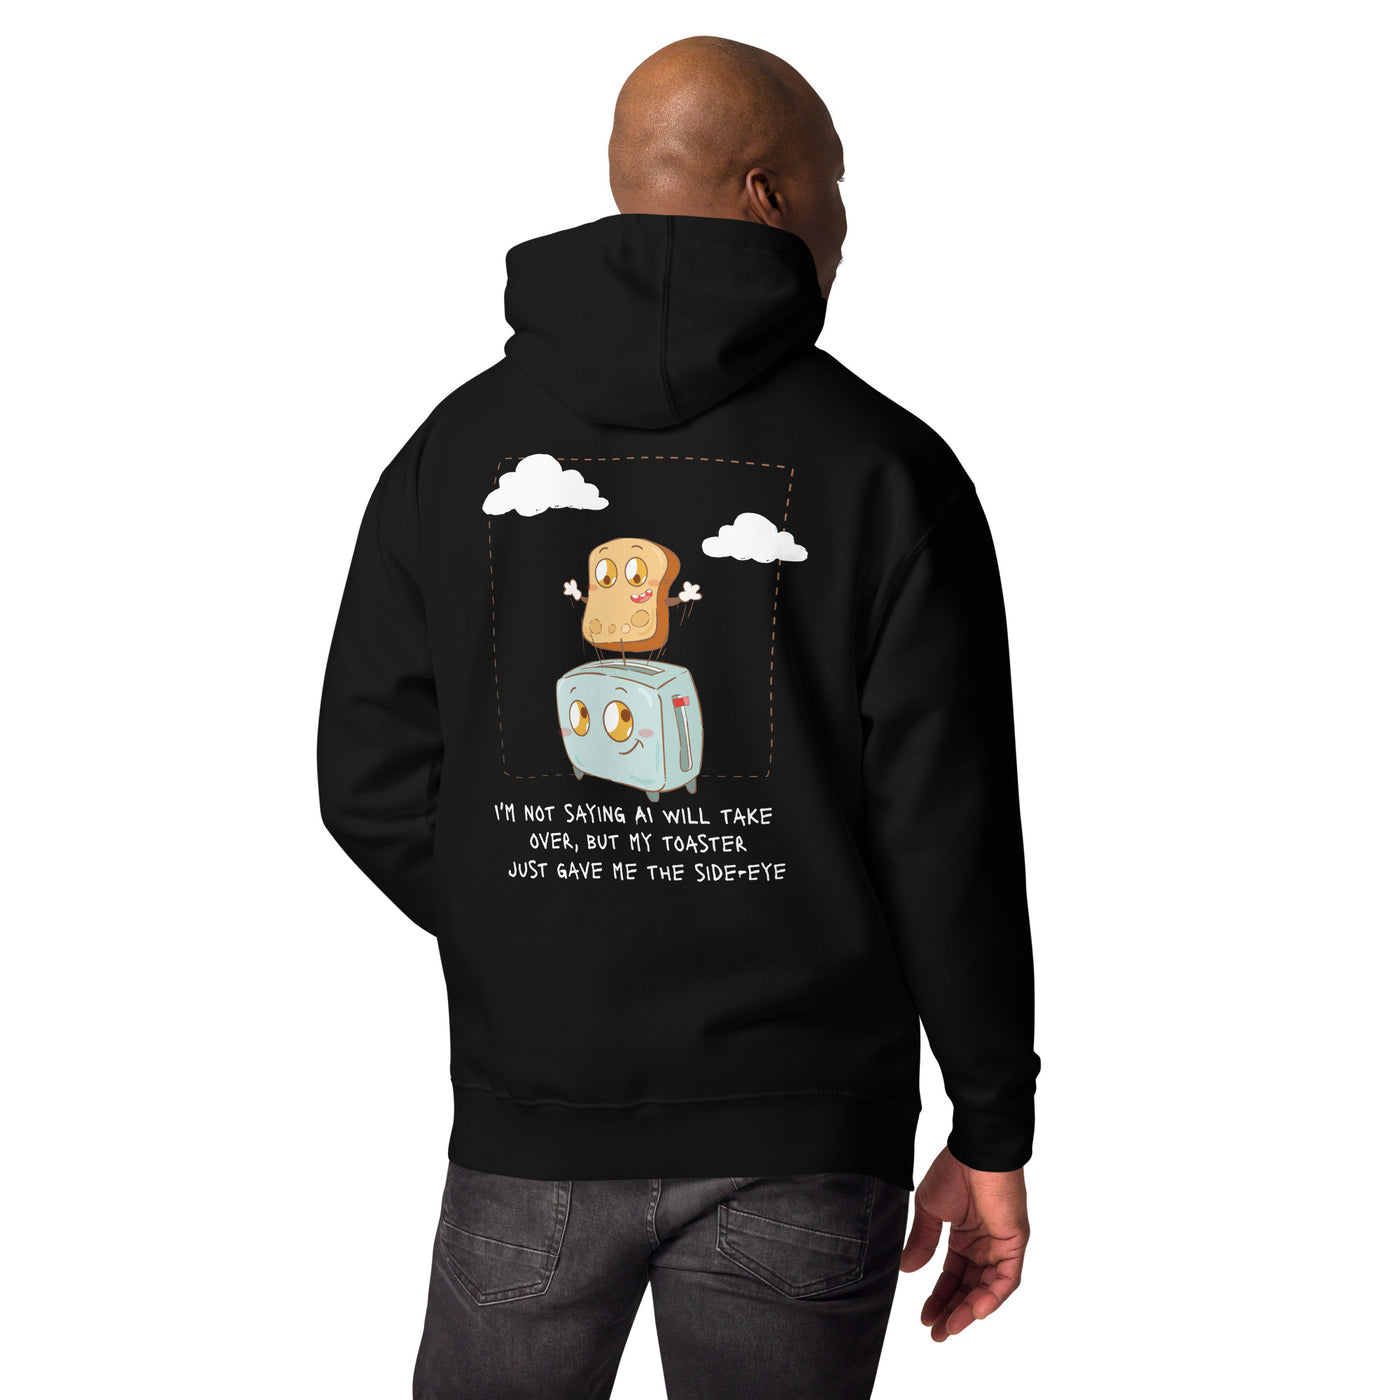 I'm not Saying AI will take over but my toaster - Unisex Hoodie ( Back Print )